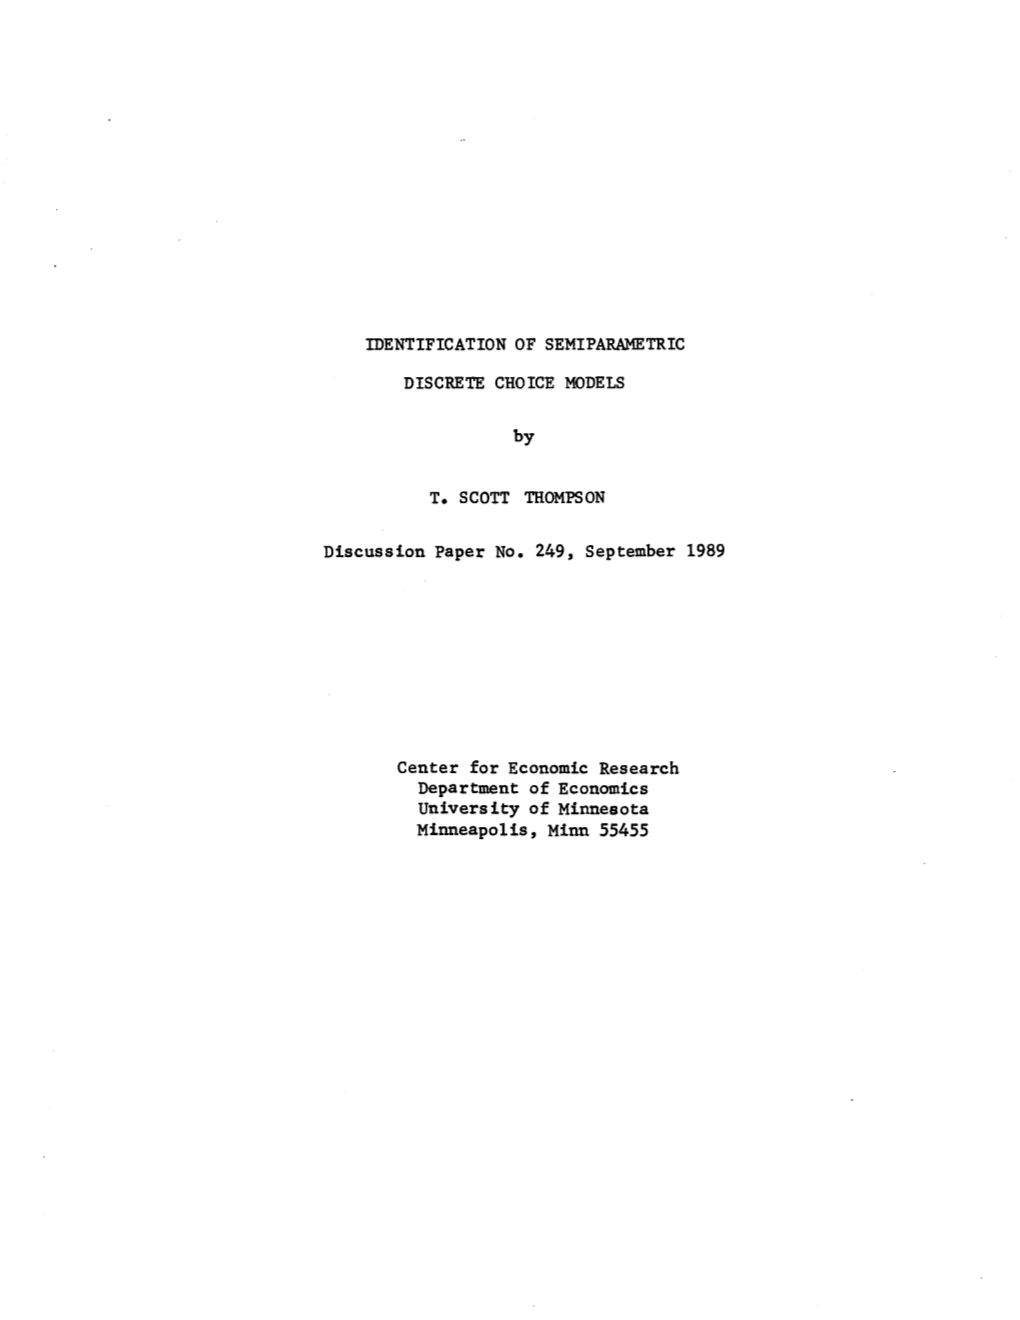 IDENTIFICATION of SEMIPARAMETRIC DISCRETE CHOICE MODELS by T. SCOTT THOMPSON Discussion Paper No. 249, September 1989 Center